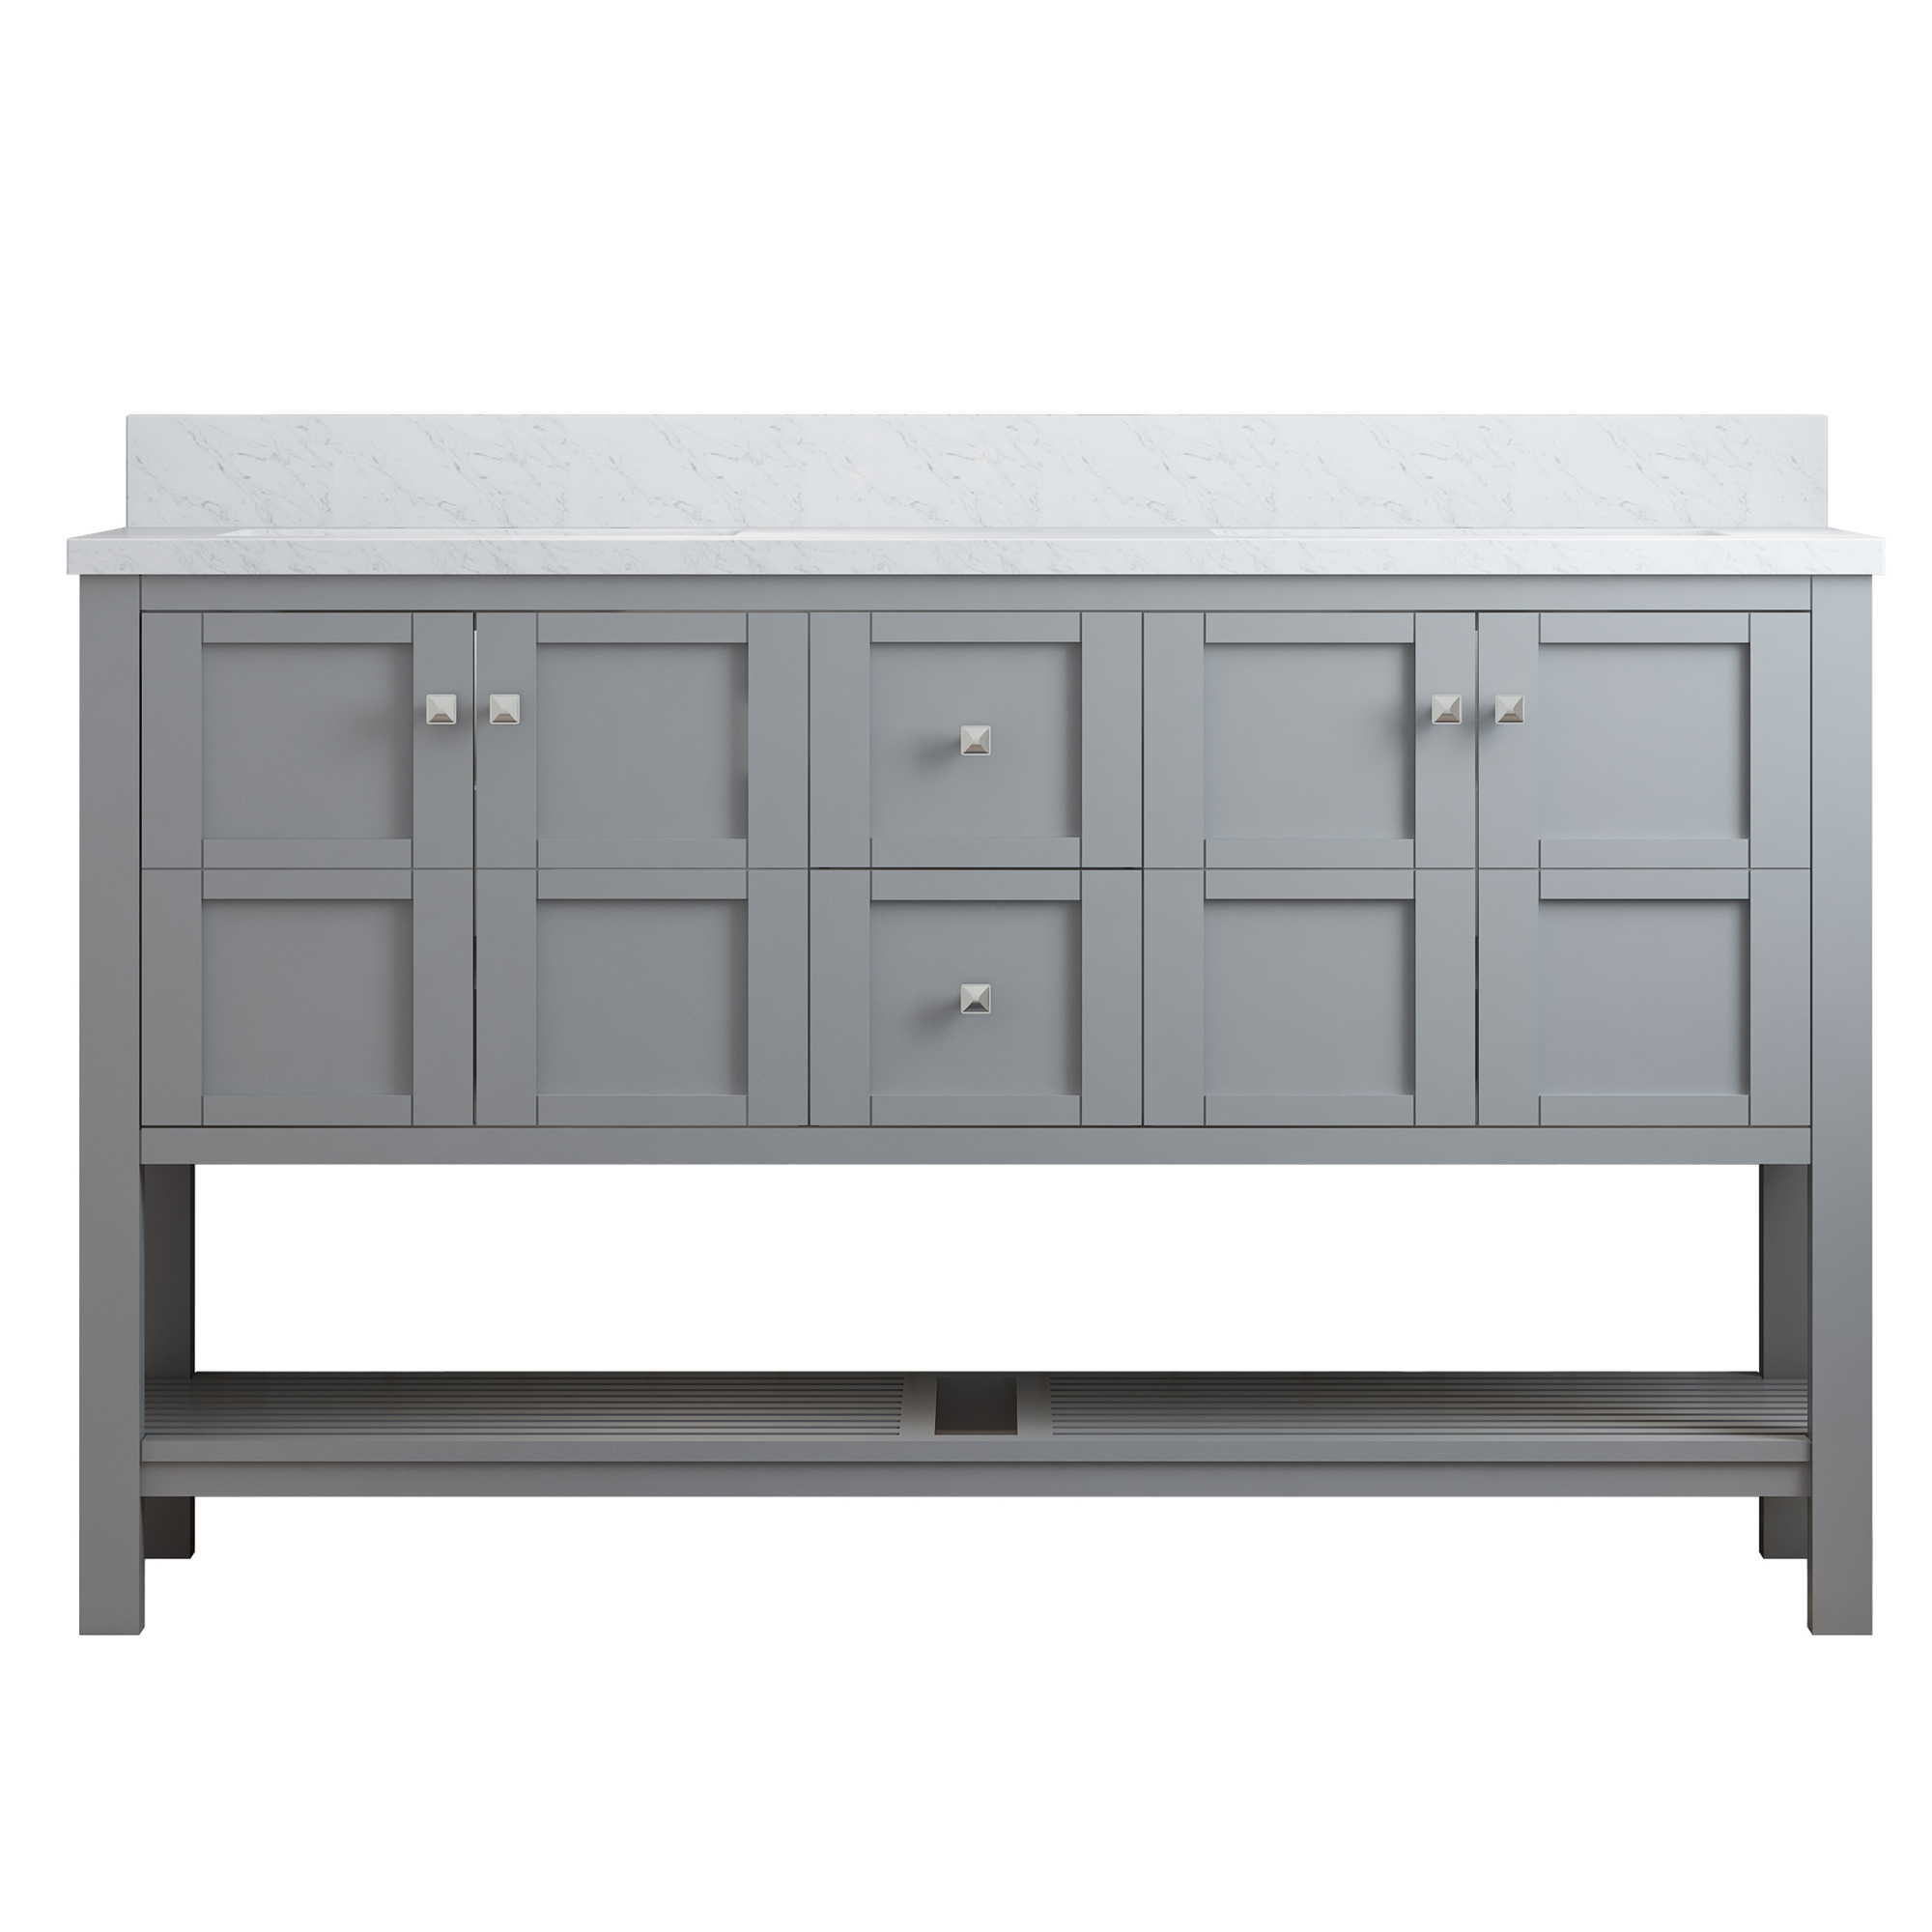 CASAINC 60 x 22 x 35.4 in. Solid Wood Bath Vanity with Carrara White Marble Top and Shelf in Gray/White (No/With Mirror)